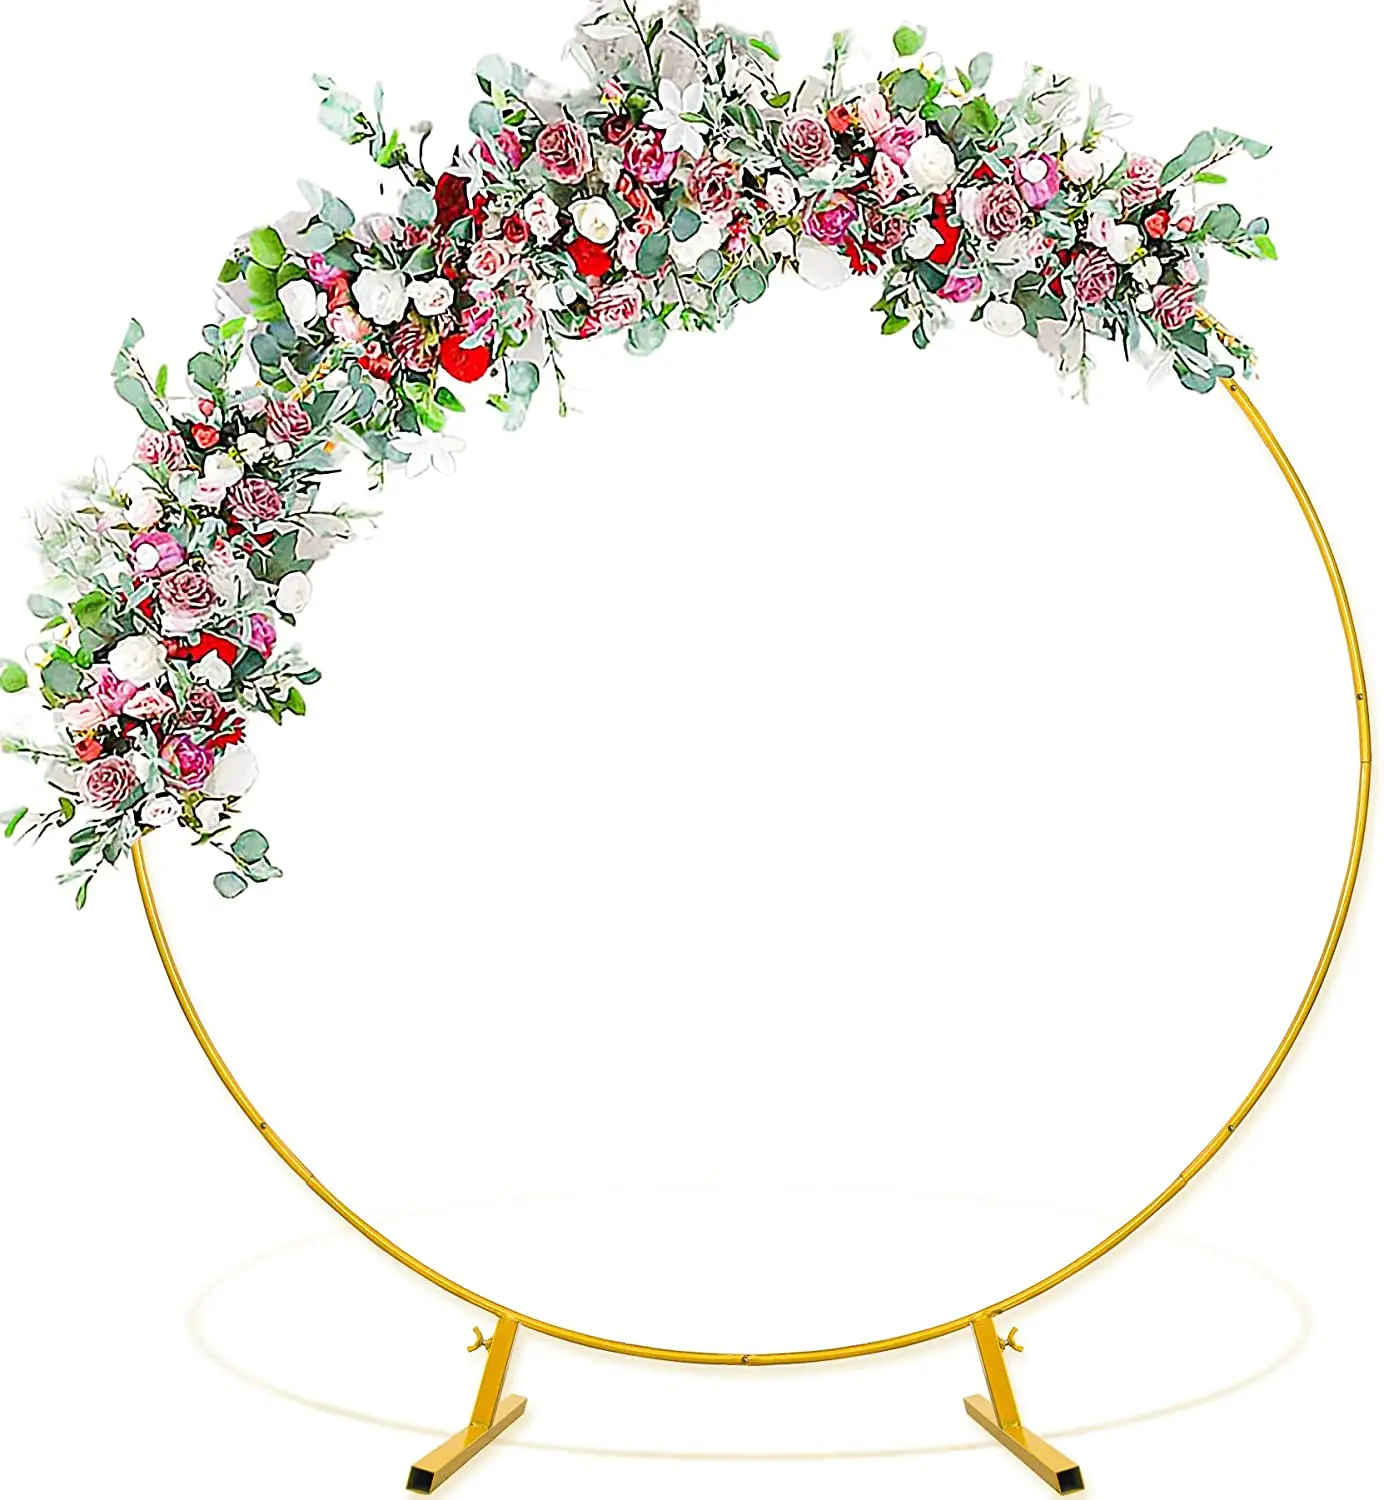 Metal Circle Balloon Arch Backdrop Stand Frame 6.56FT Gold Round Wedding Arch Stand Garden Ballon Flower Arch Holder Stand for Wedding Birthday Party Birthday Party Wedding 